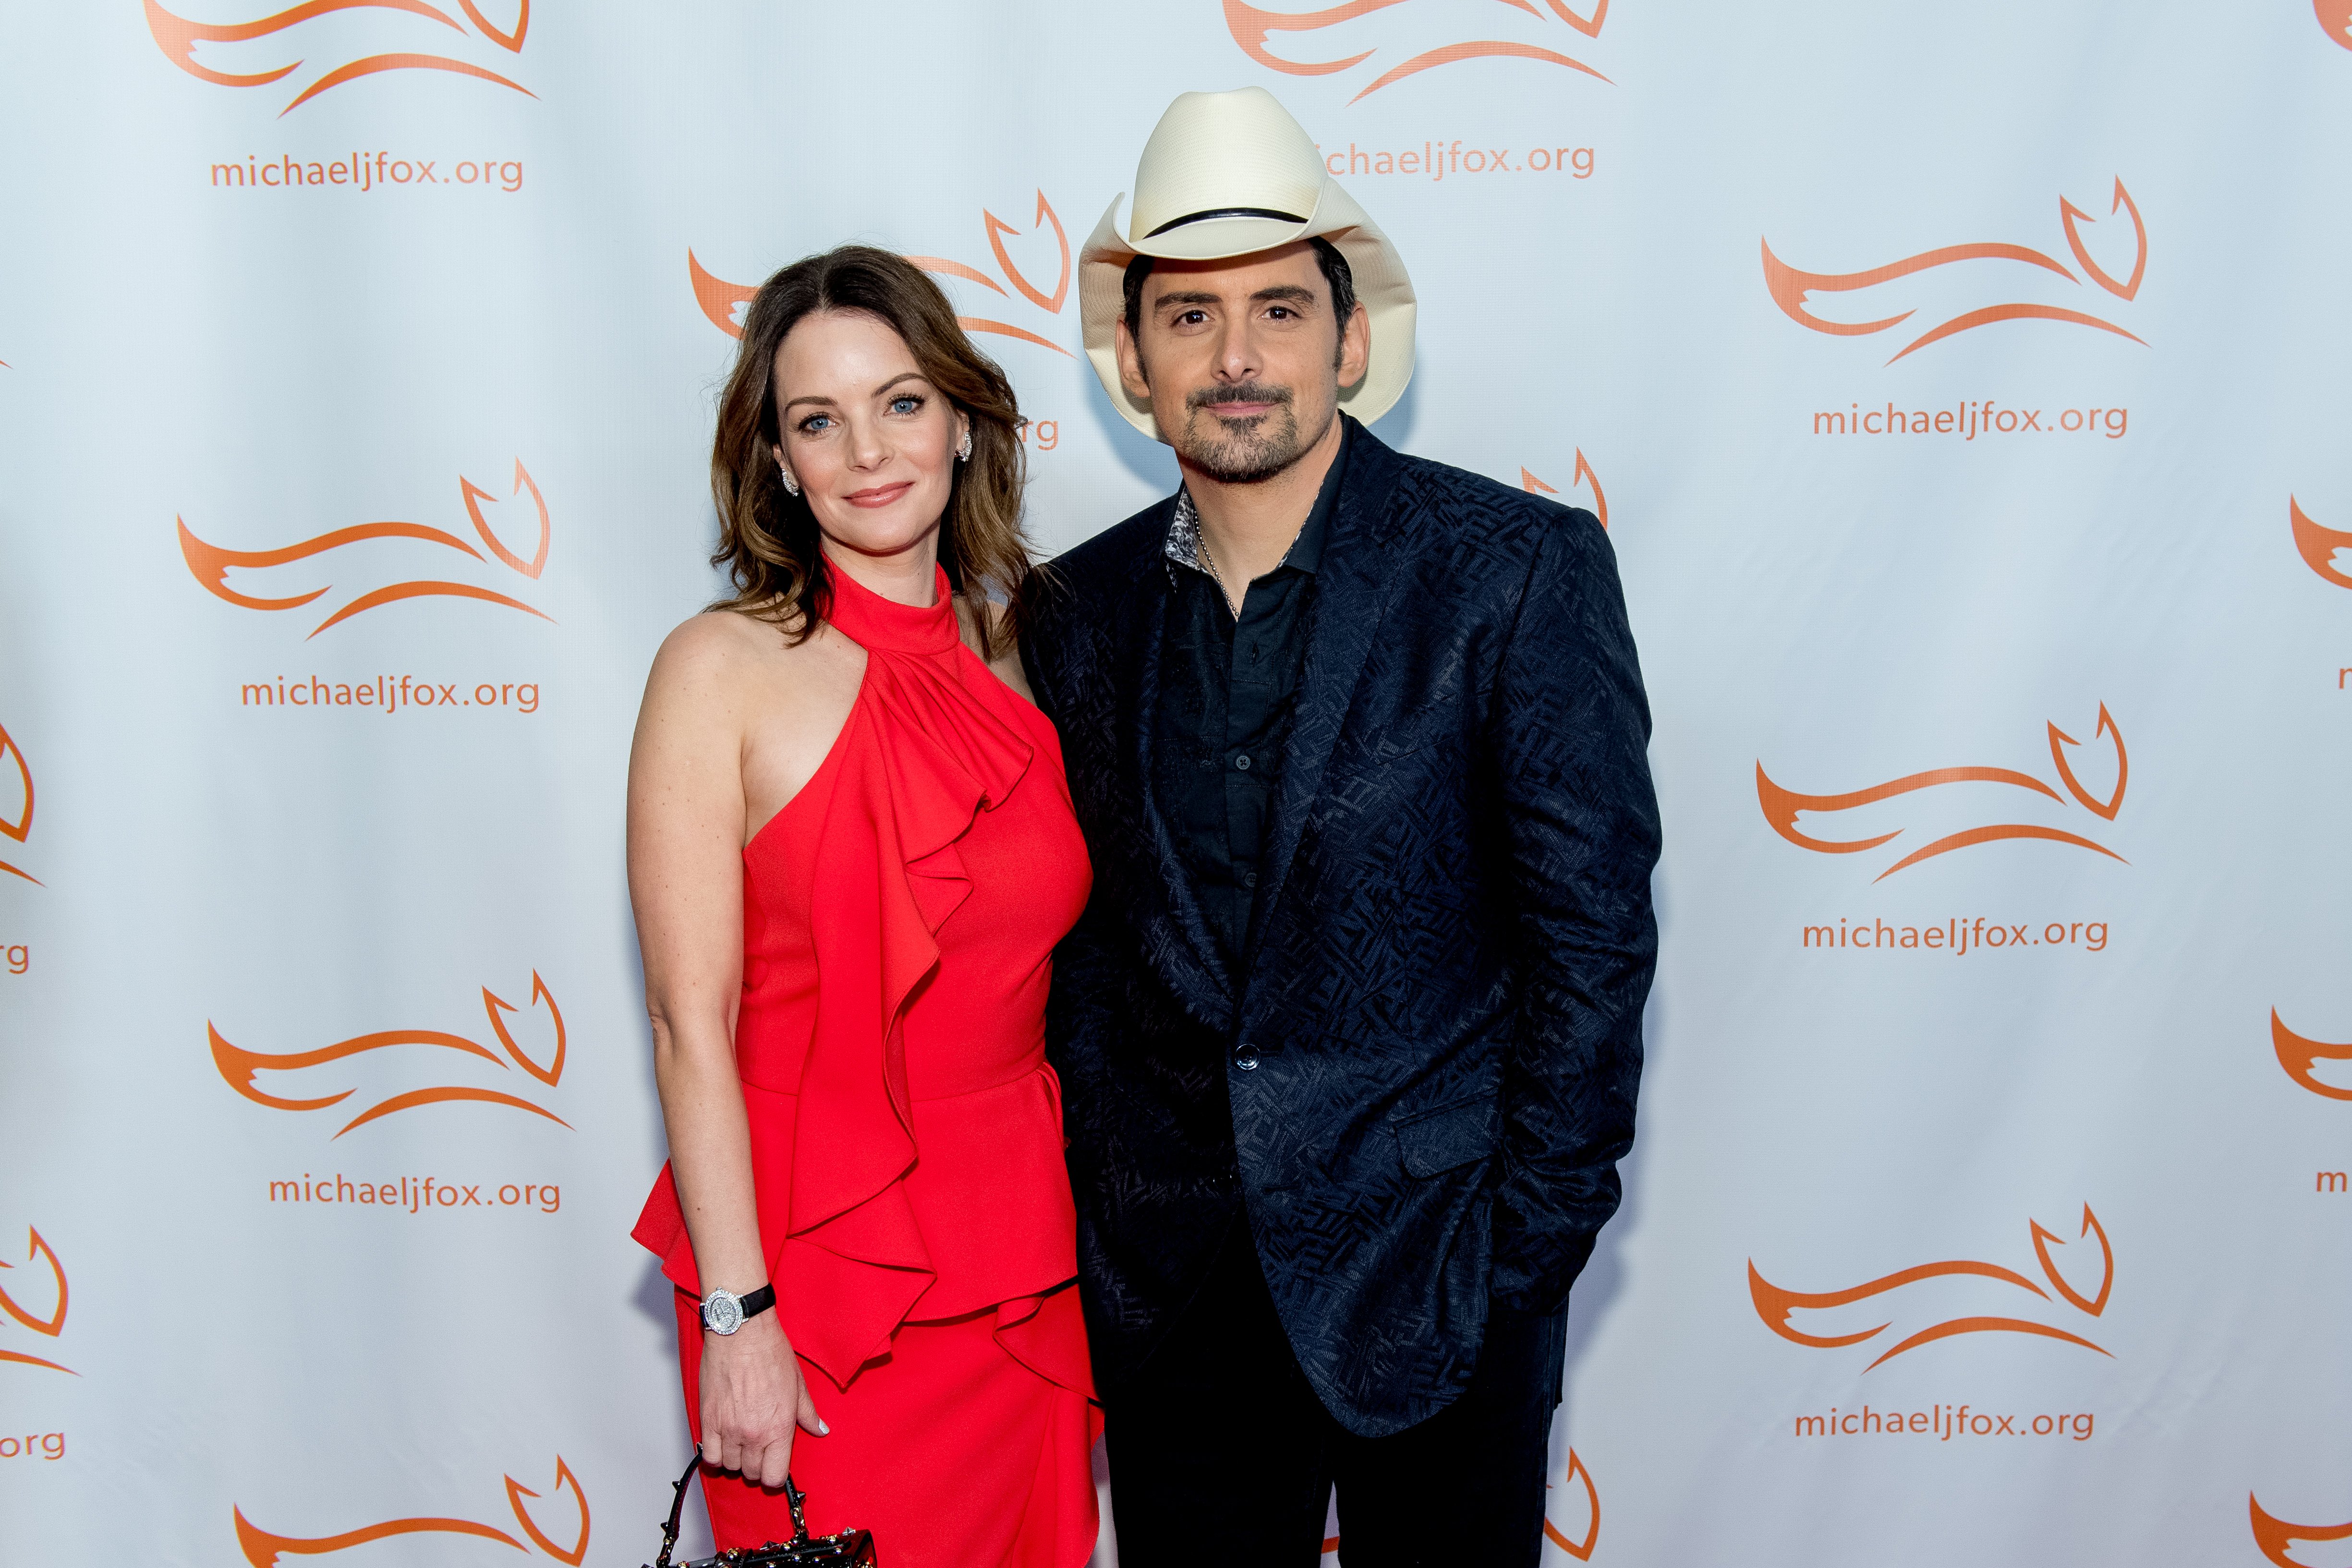 Kimberly Williams-Paisley and Brad Paisley attends the 2017 a funny thing happened on the way to cure Parkinson's benefitting The Michael J. Fox Foundation at the Hilton New York on November 11, 2017 in New York City. | Source: Getty Images